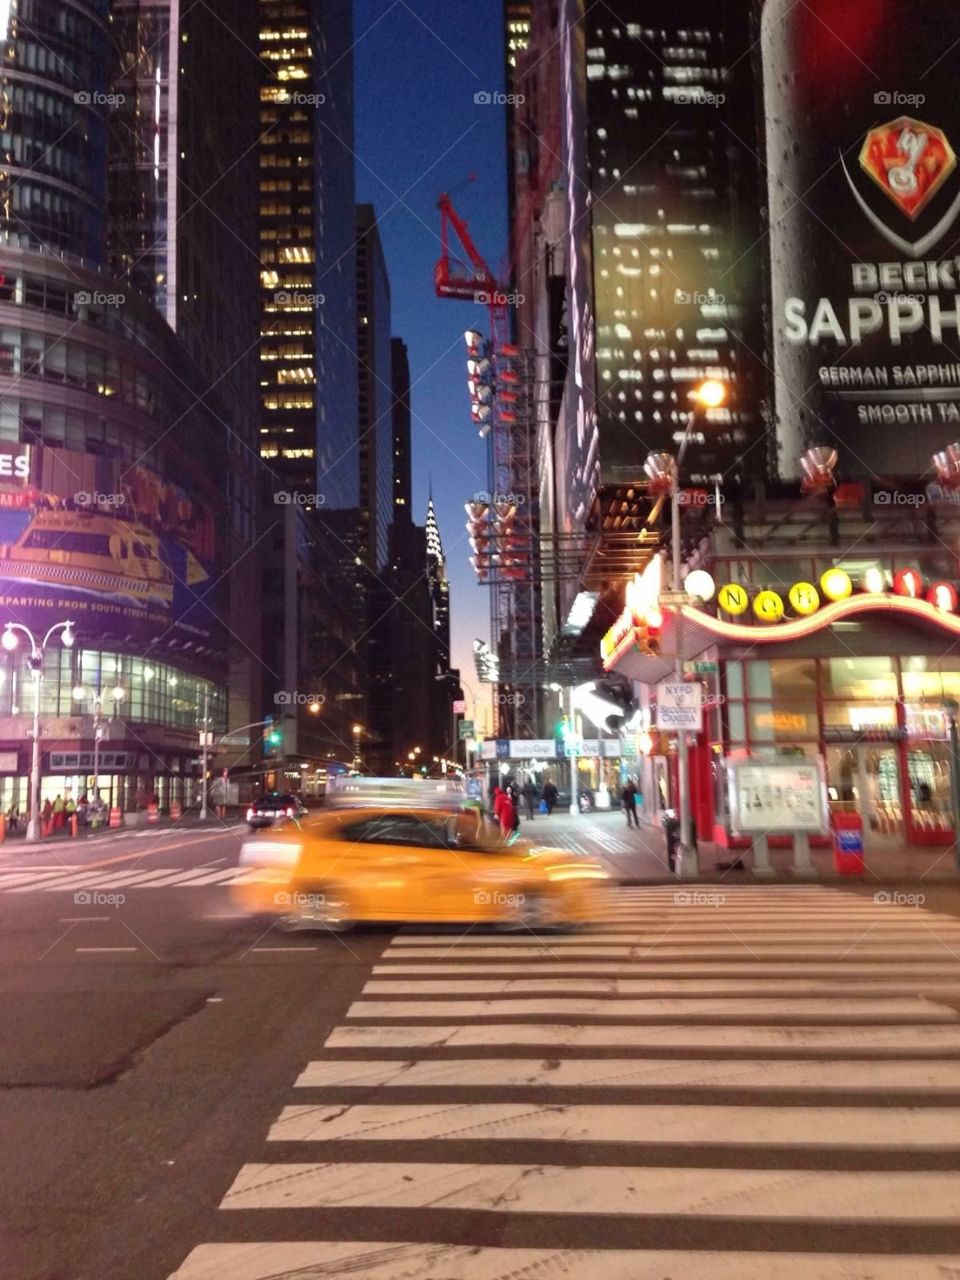 Times Square at night